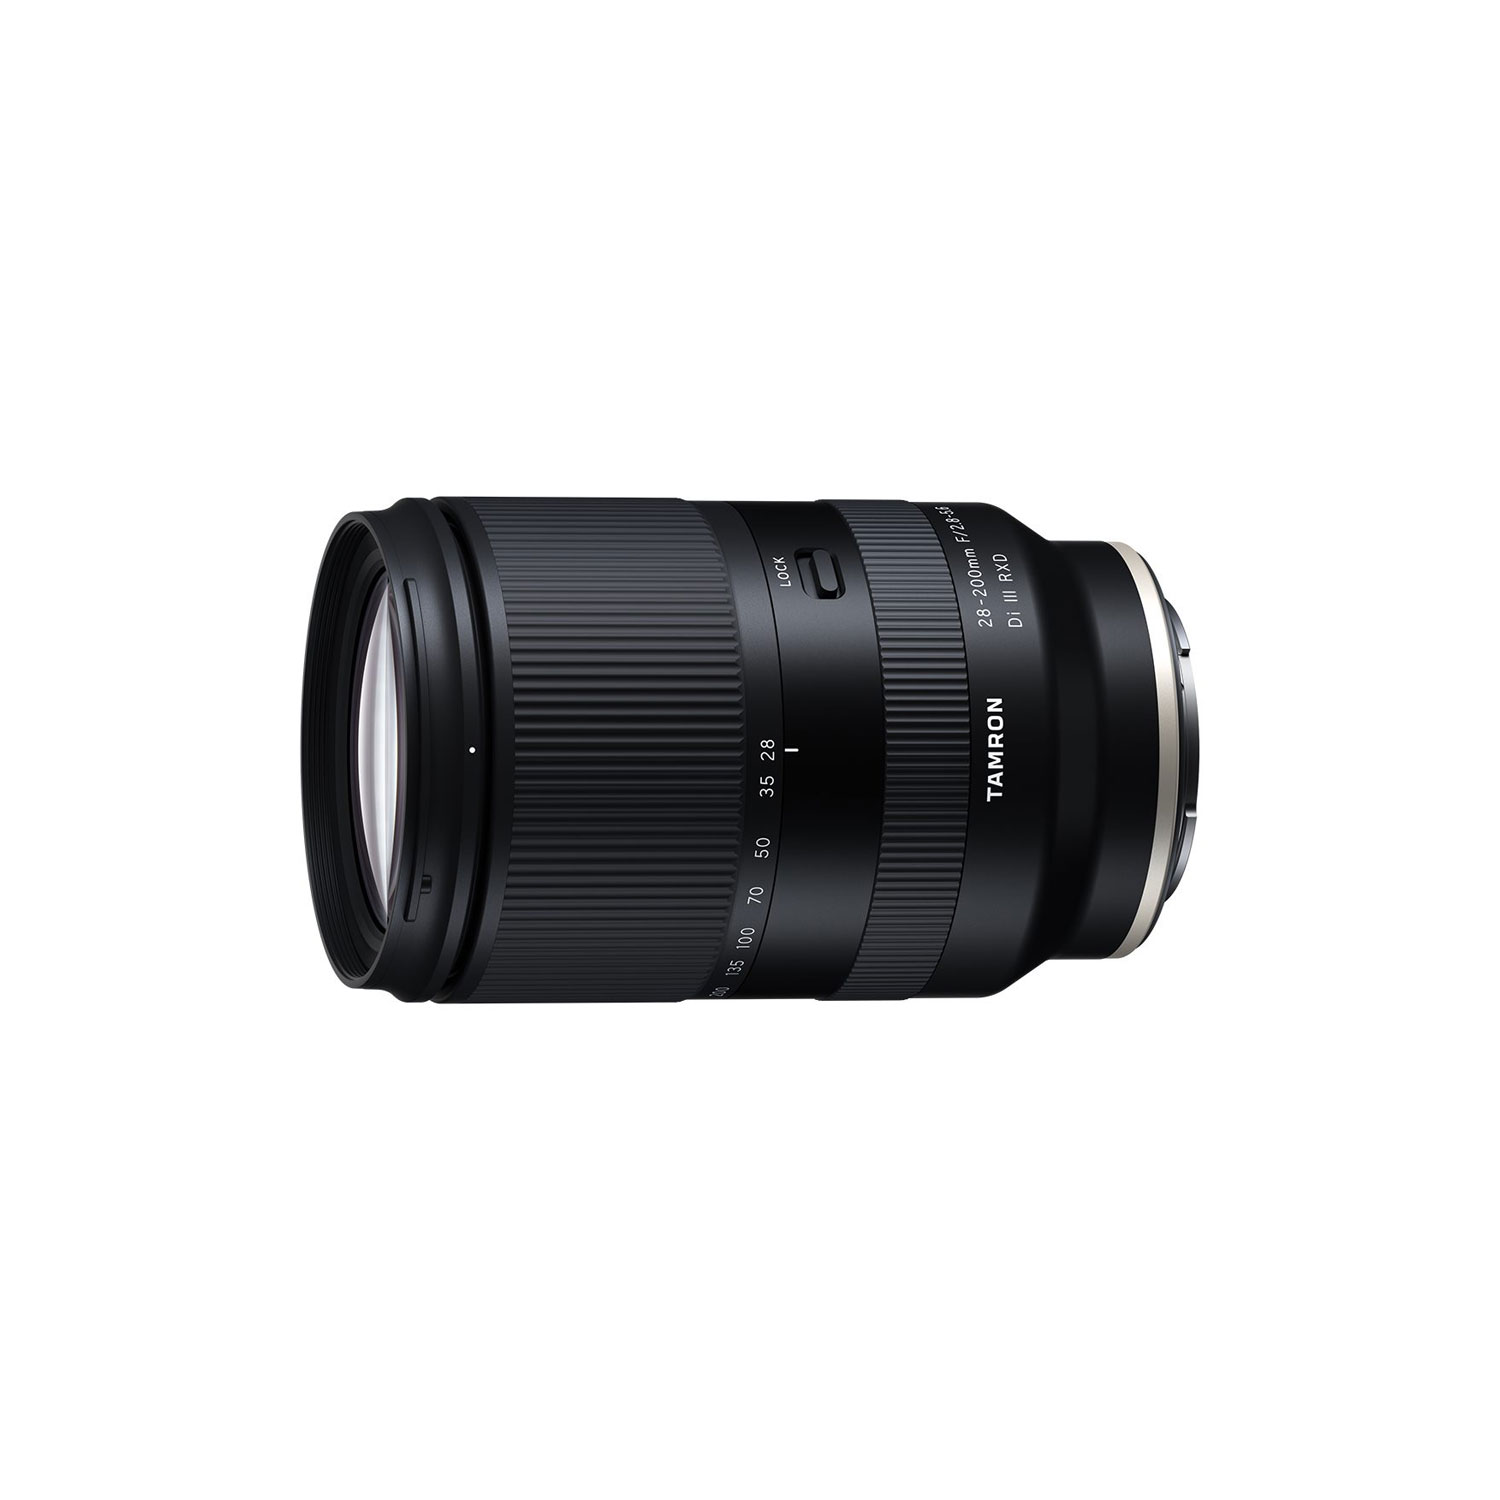 Tamron 28-200mm F/2.8-5.6 Di III RXD Lens for Sony E - The Camera